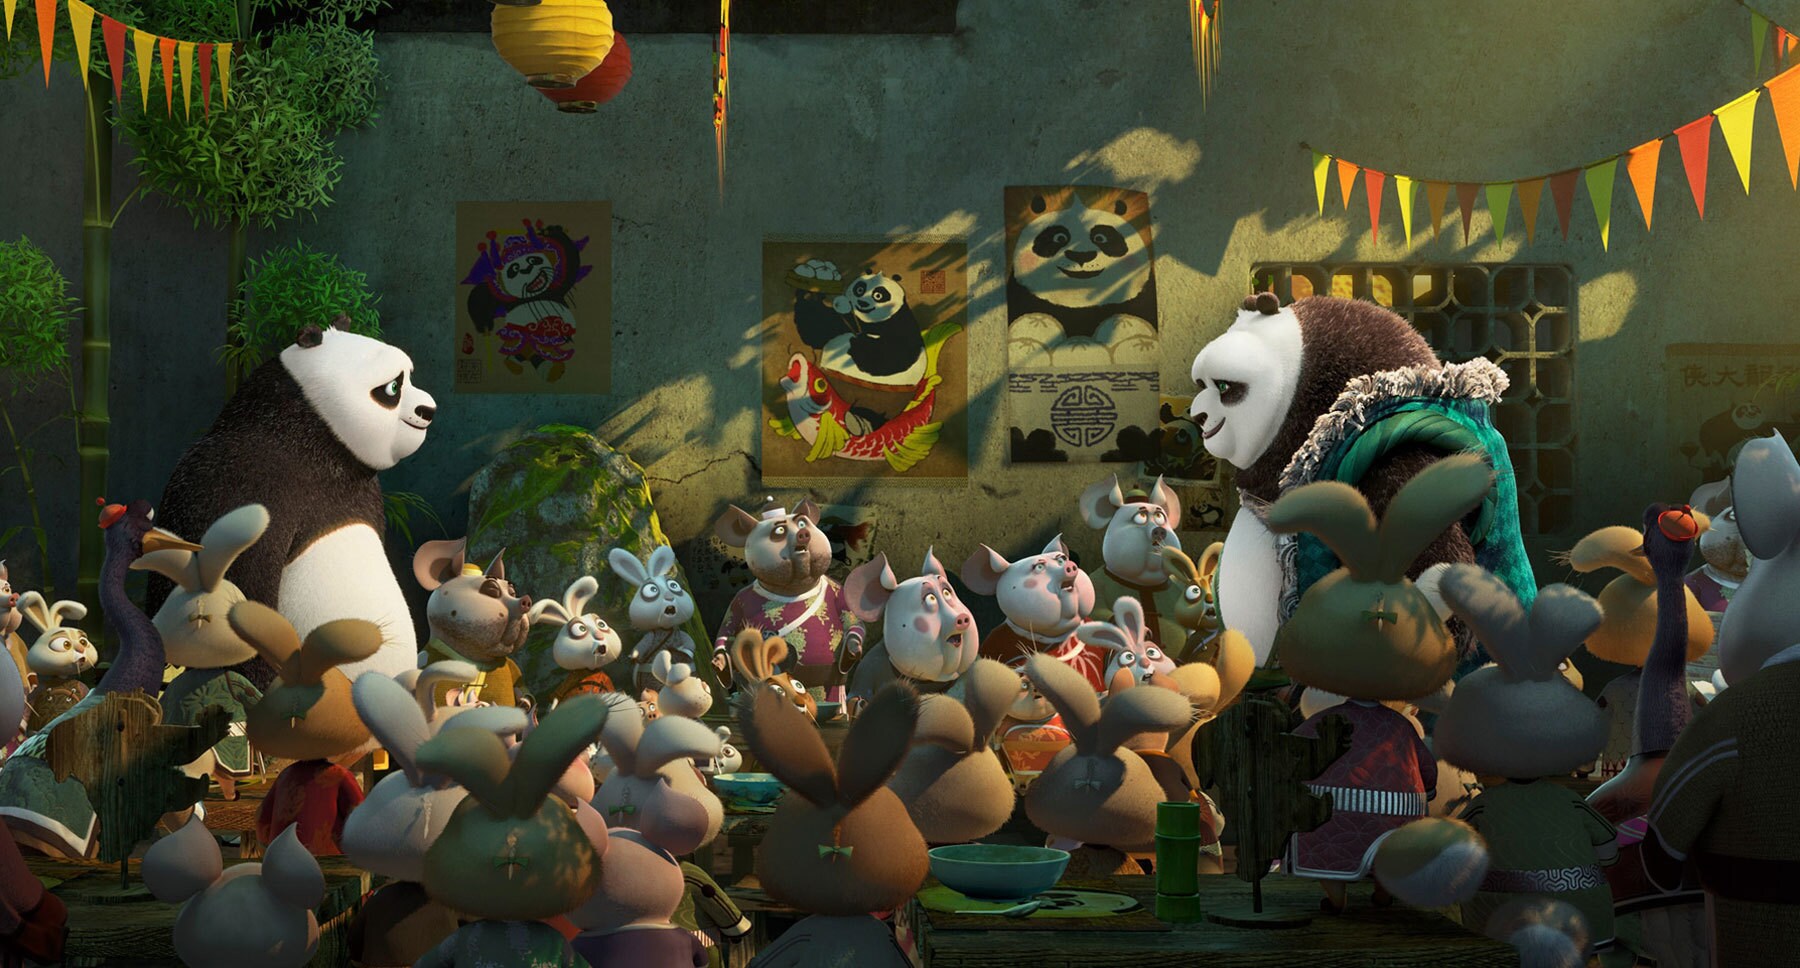 Po (Jack Black) and Li (Bryan Cranston) talking to a room full of animals in the movie "Kung Fu Panda 3"